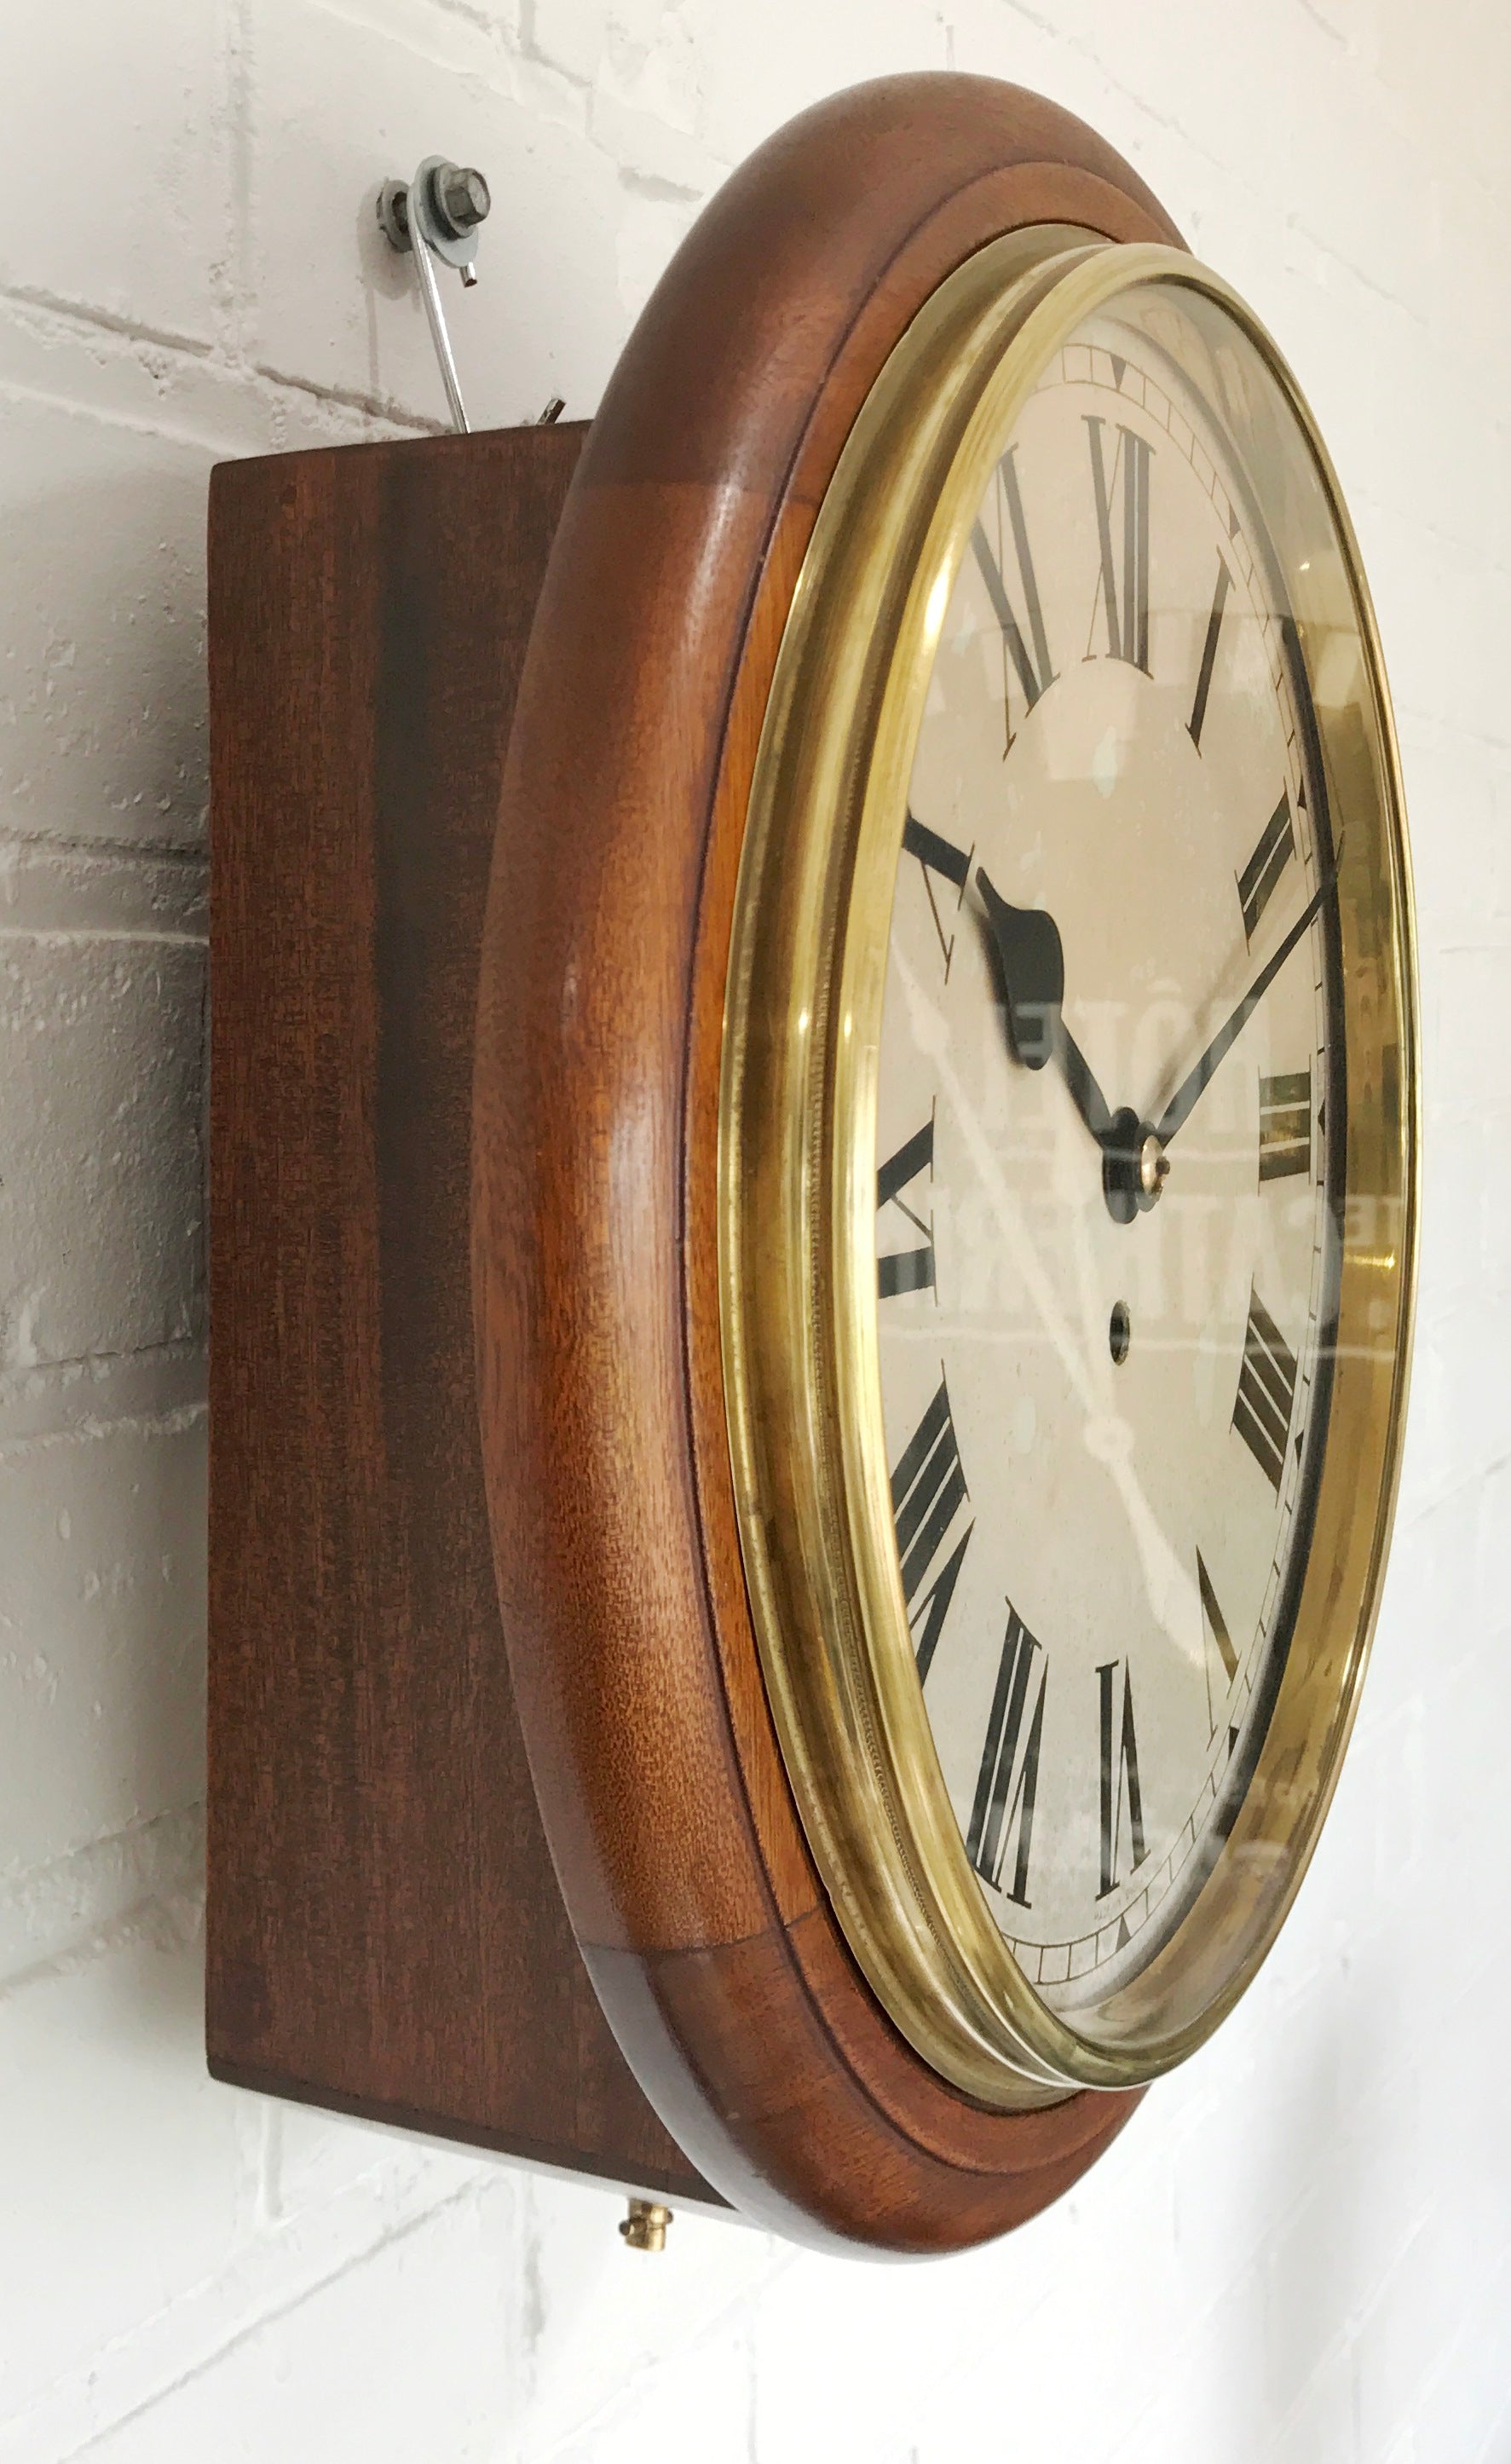 Antique Fusee Station Round Wall Clock | eXibit collection